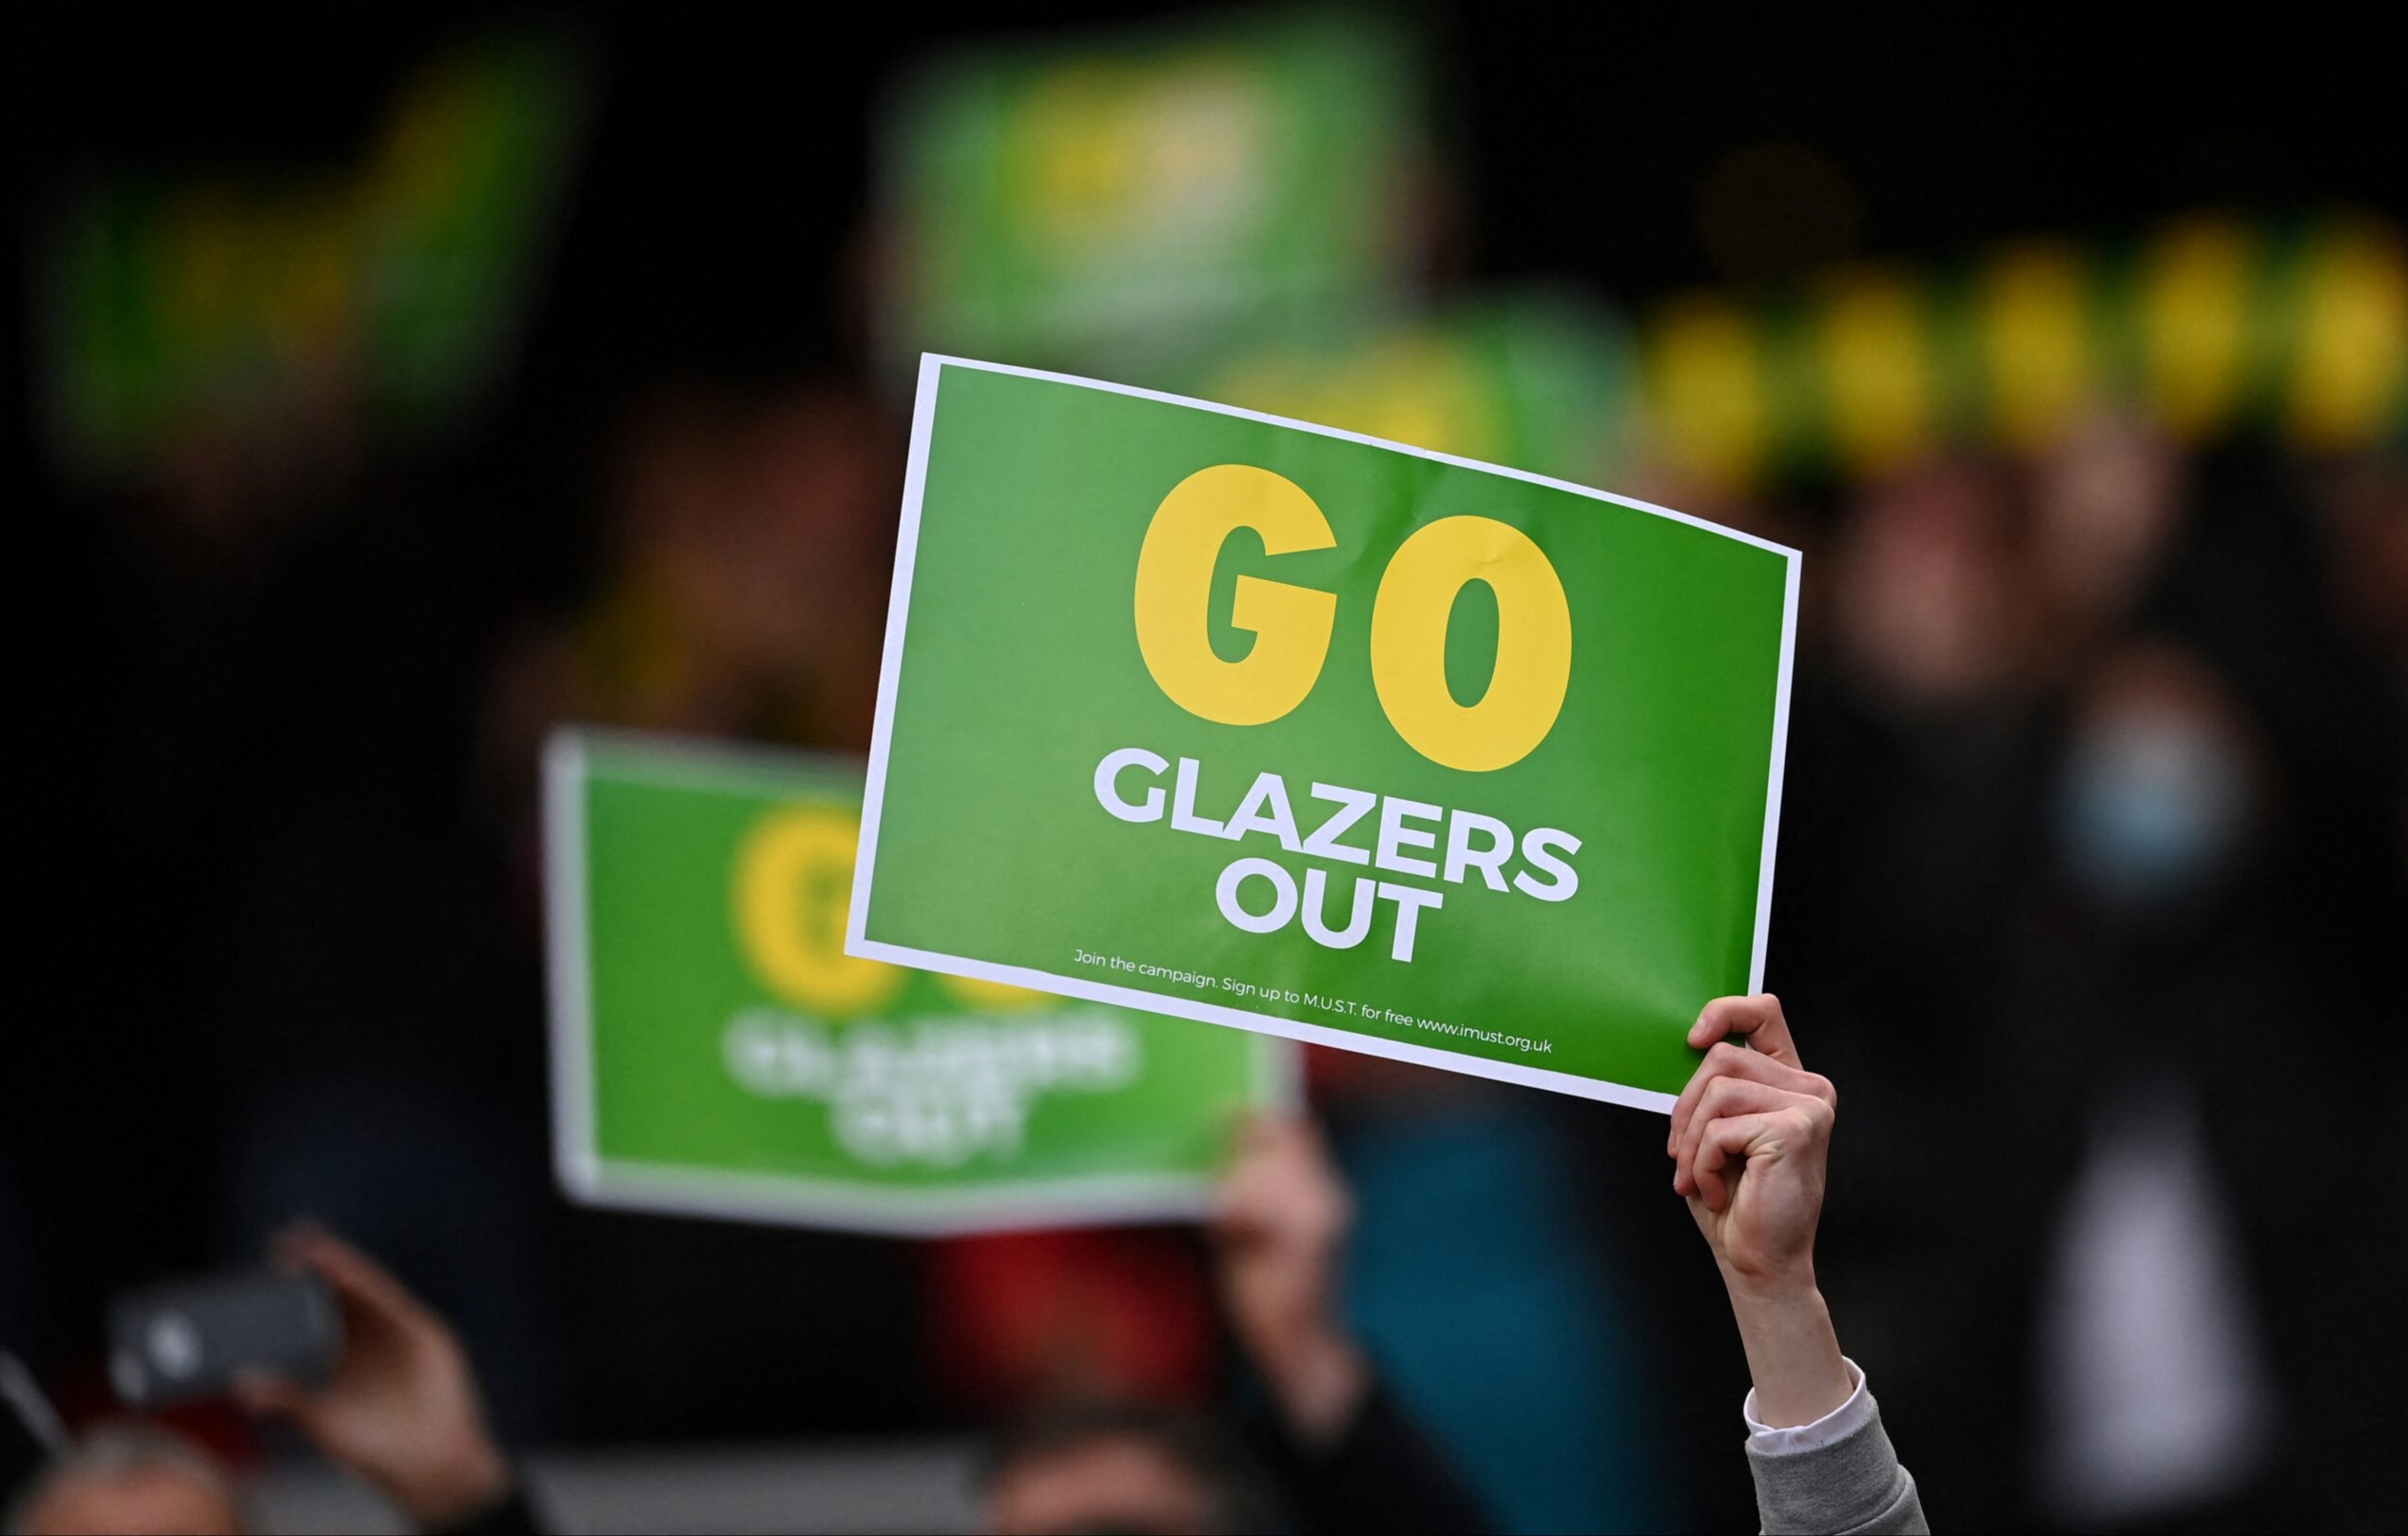 Glazers wanted out by Man United supporters